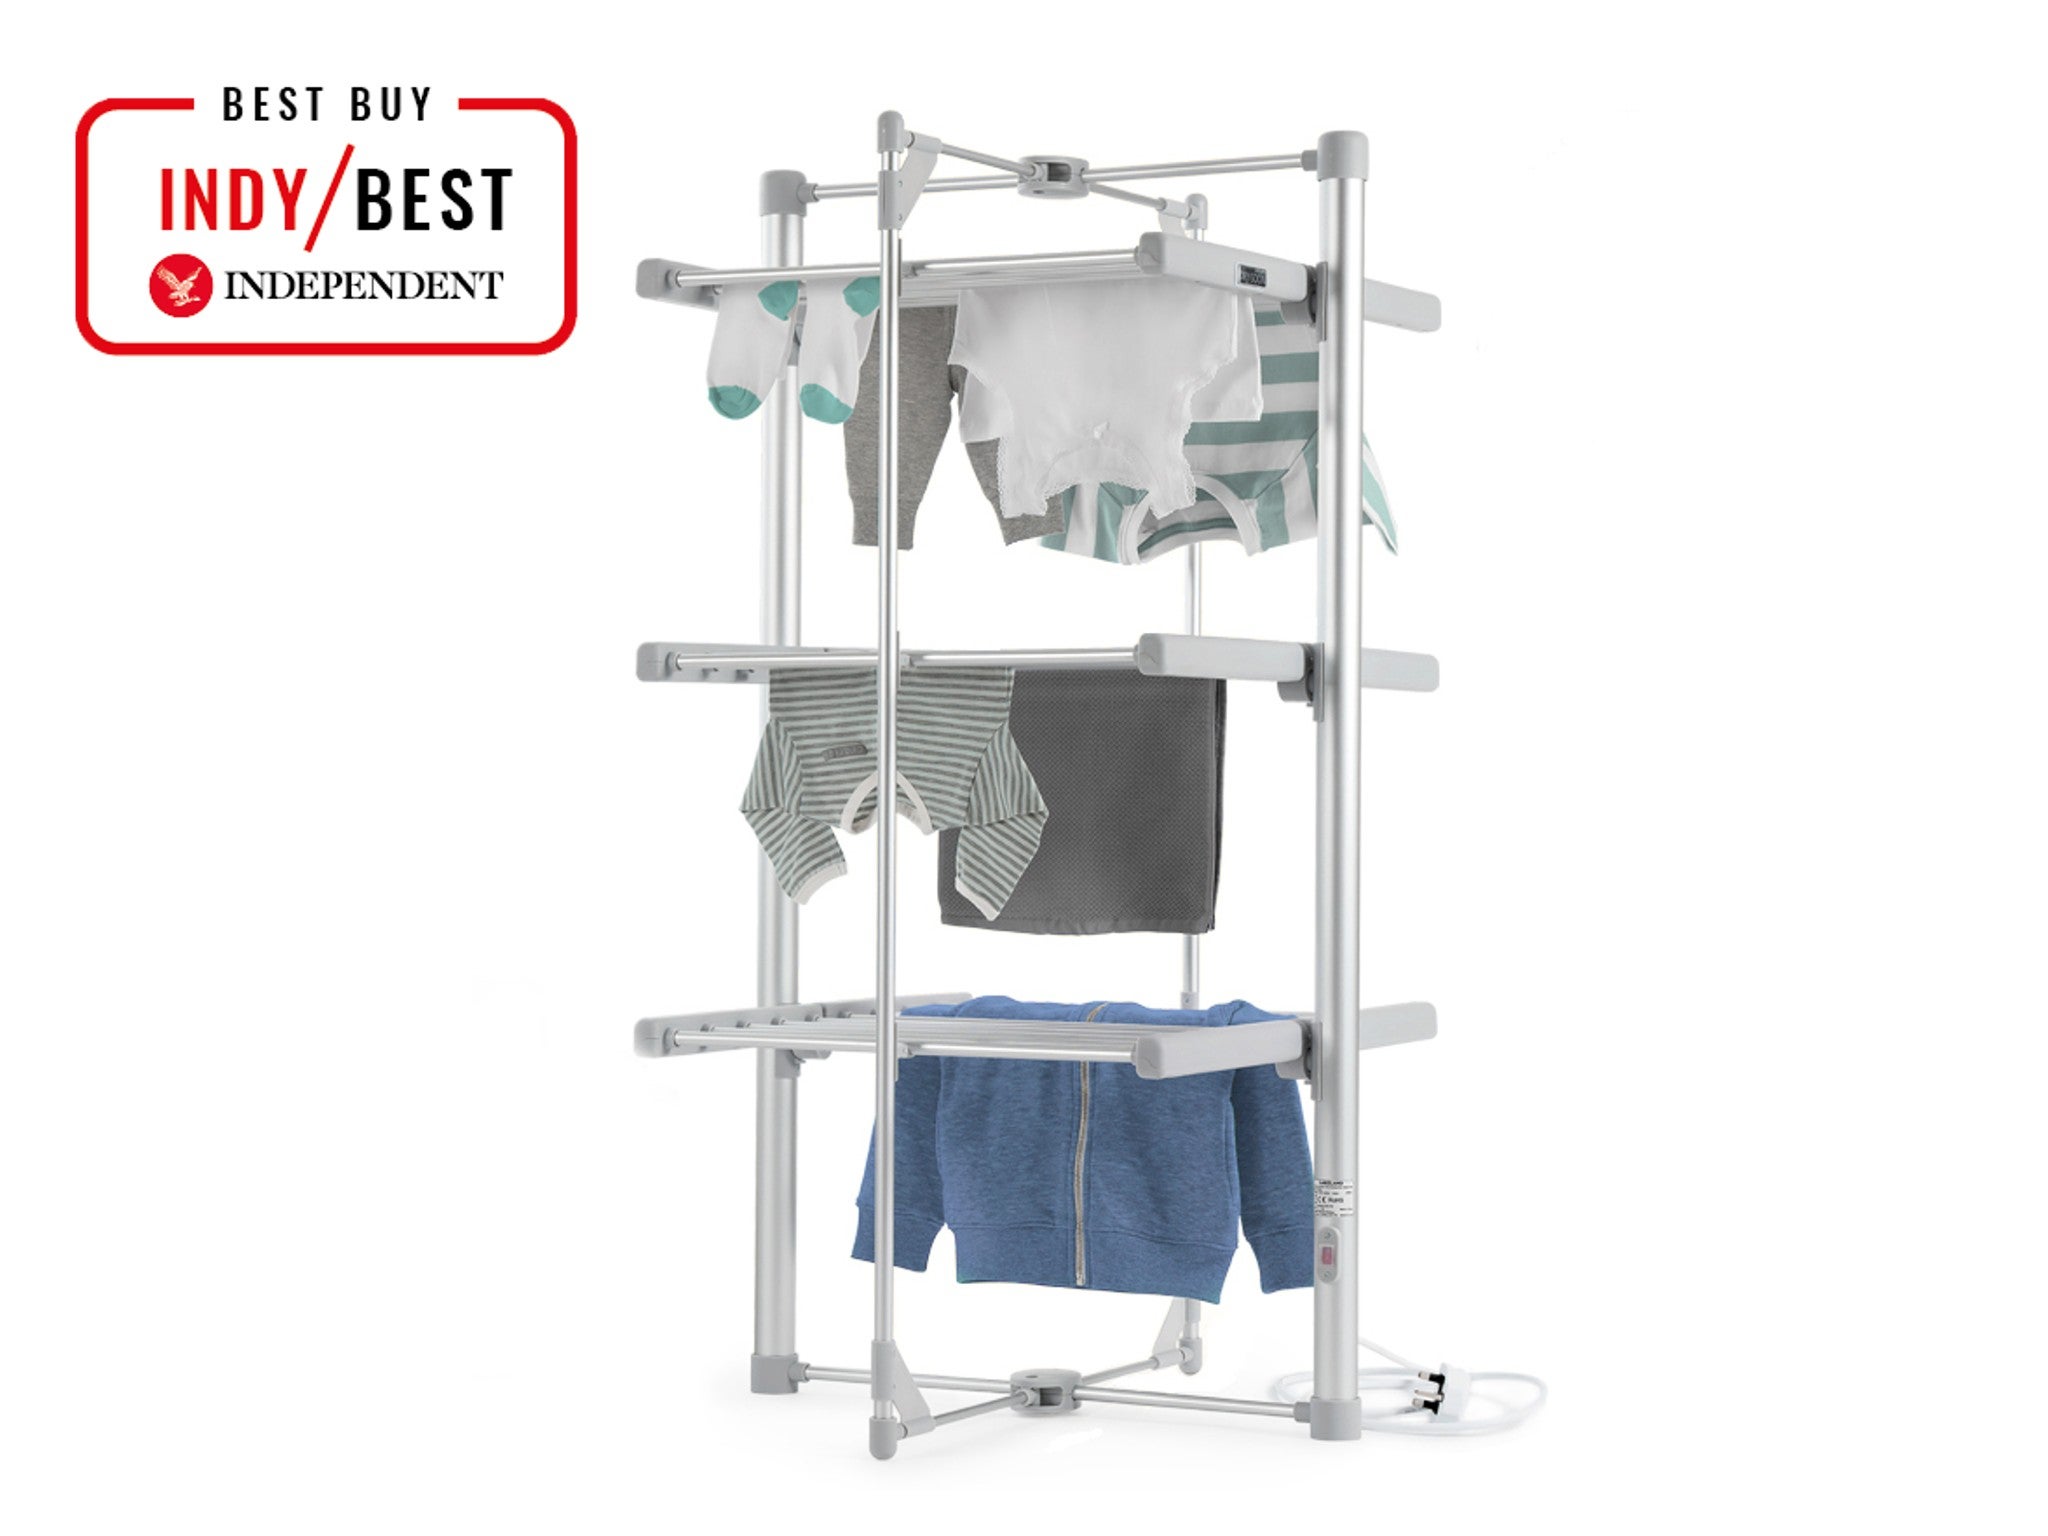 Clothes Drying Rack 3 Tier Clothes Dryer Rack Foldable Laundry Clothes Rack UK 